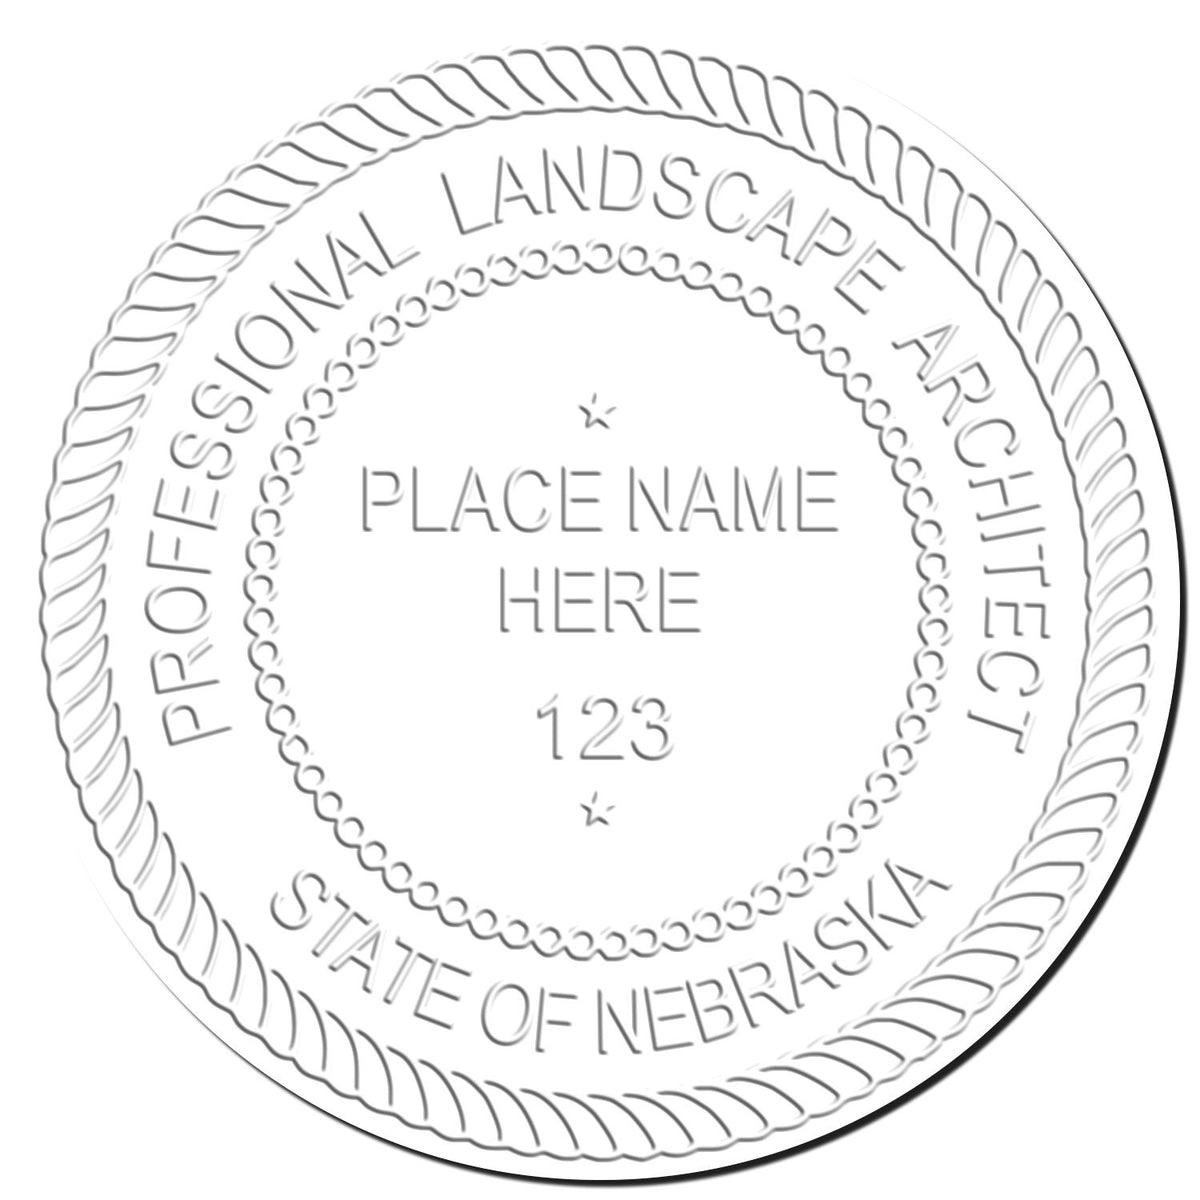 This paper is stamped with a sample imprint of the Hybrid Nebraska Landscape Architect Seal, signifying its quality and reliability.